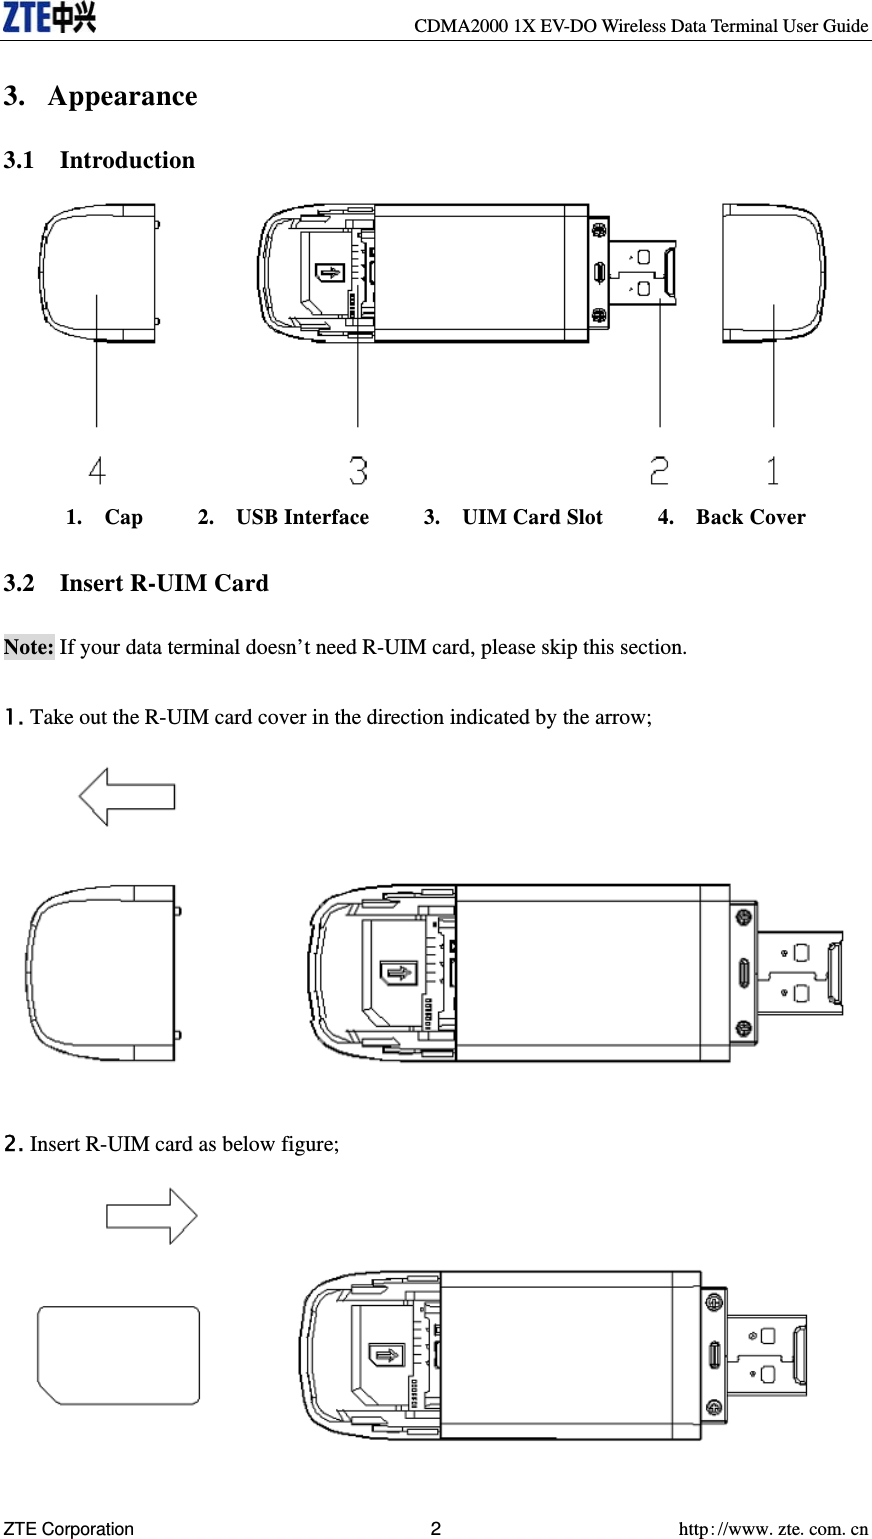     CDMA2000 1X EV-DO Wireless Data Terminal User Guide ZTE Corporation 2 http://www.zte.com.cn  3. Appearance 3.1  Introduction  1.  Cap     2.  USB Interface     3.  UIM Card Slot     4.  Back Cover  3.2  Insert R-UIM Card  Note: If your data terminal doesn’t need R-UIM card, please skip this section.  1. Take out the R-UIM card cover in the direction indicated by the arrow;   2. Insert R-UIM card as below figure;   